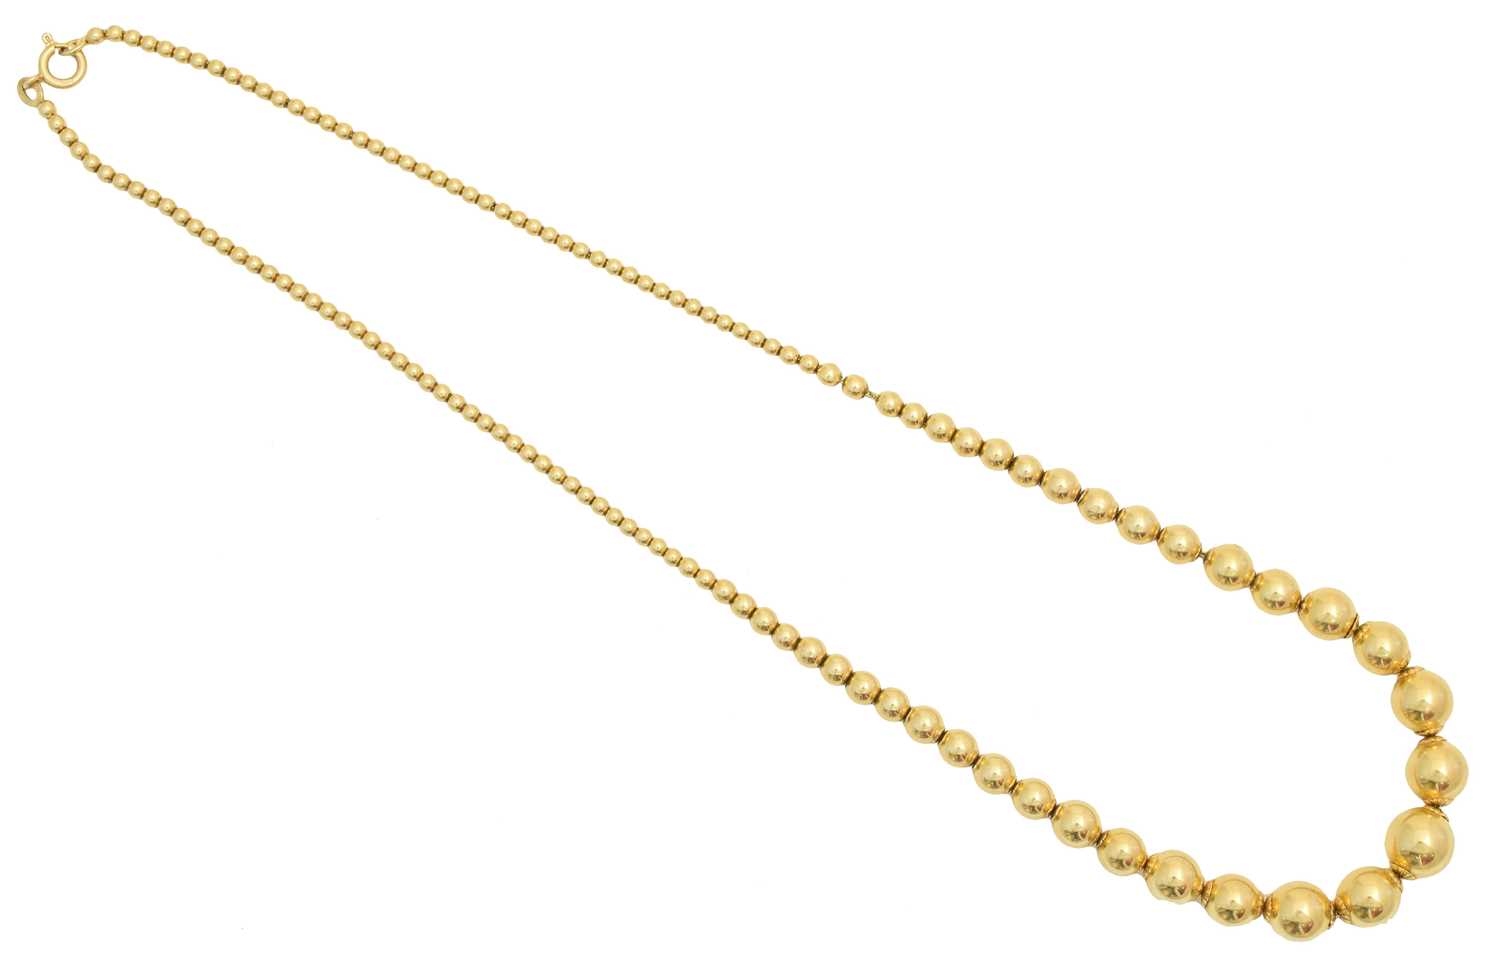 Lot 59 - An 18ct gold necklace by UnoAErre